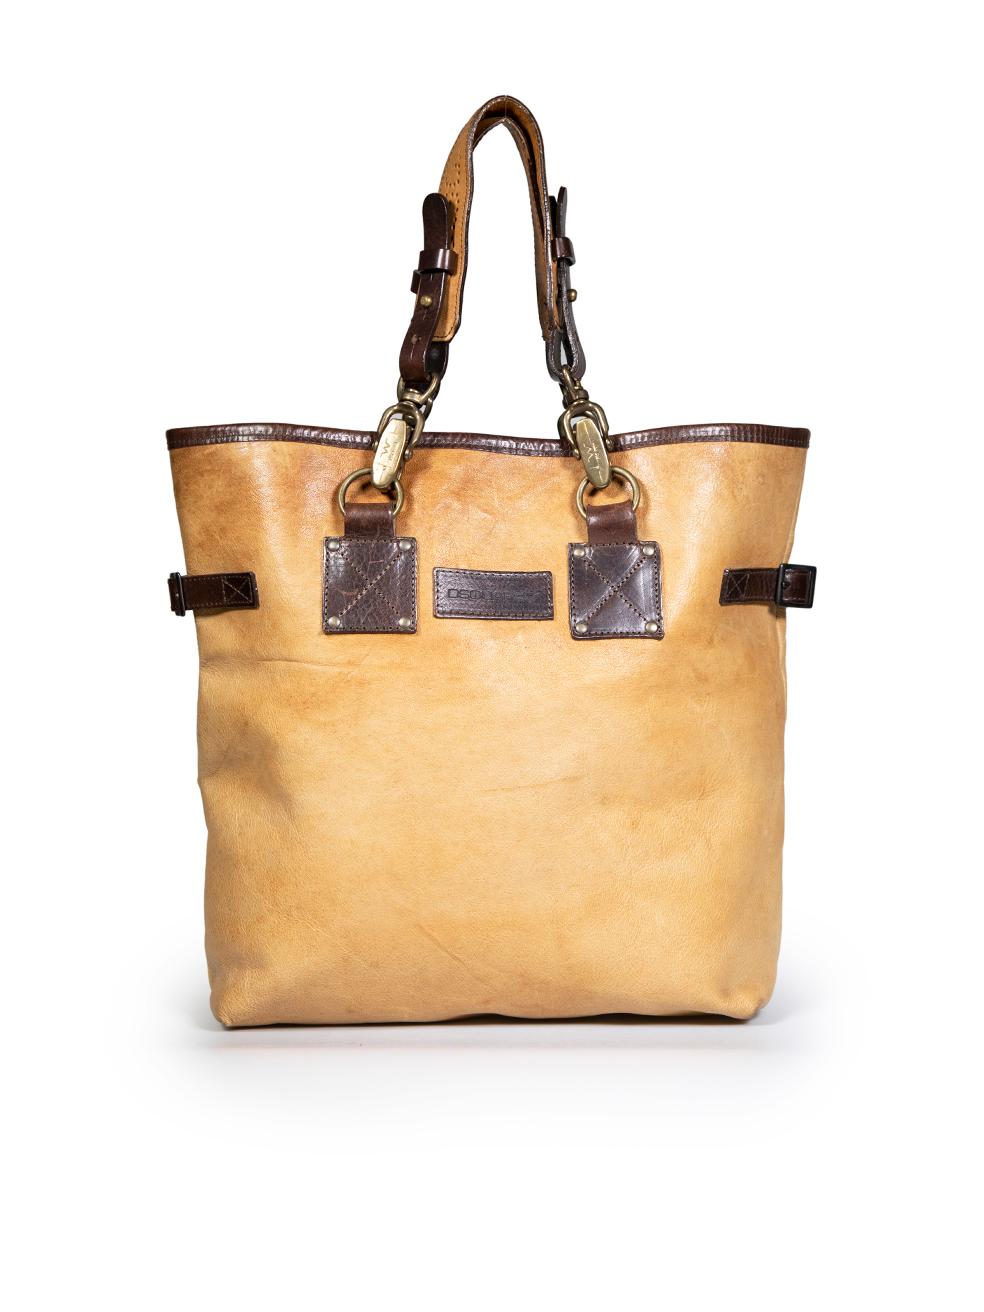 Dsquared2 Brown Leather Buckle Detail Tote im Zustand „Gut“ im Angebot in London, GB